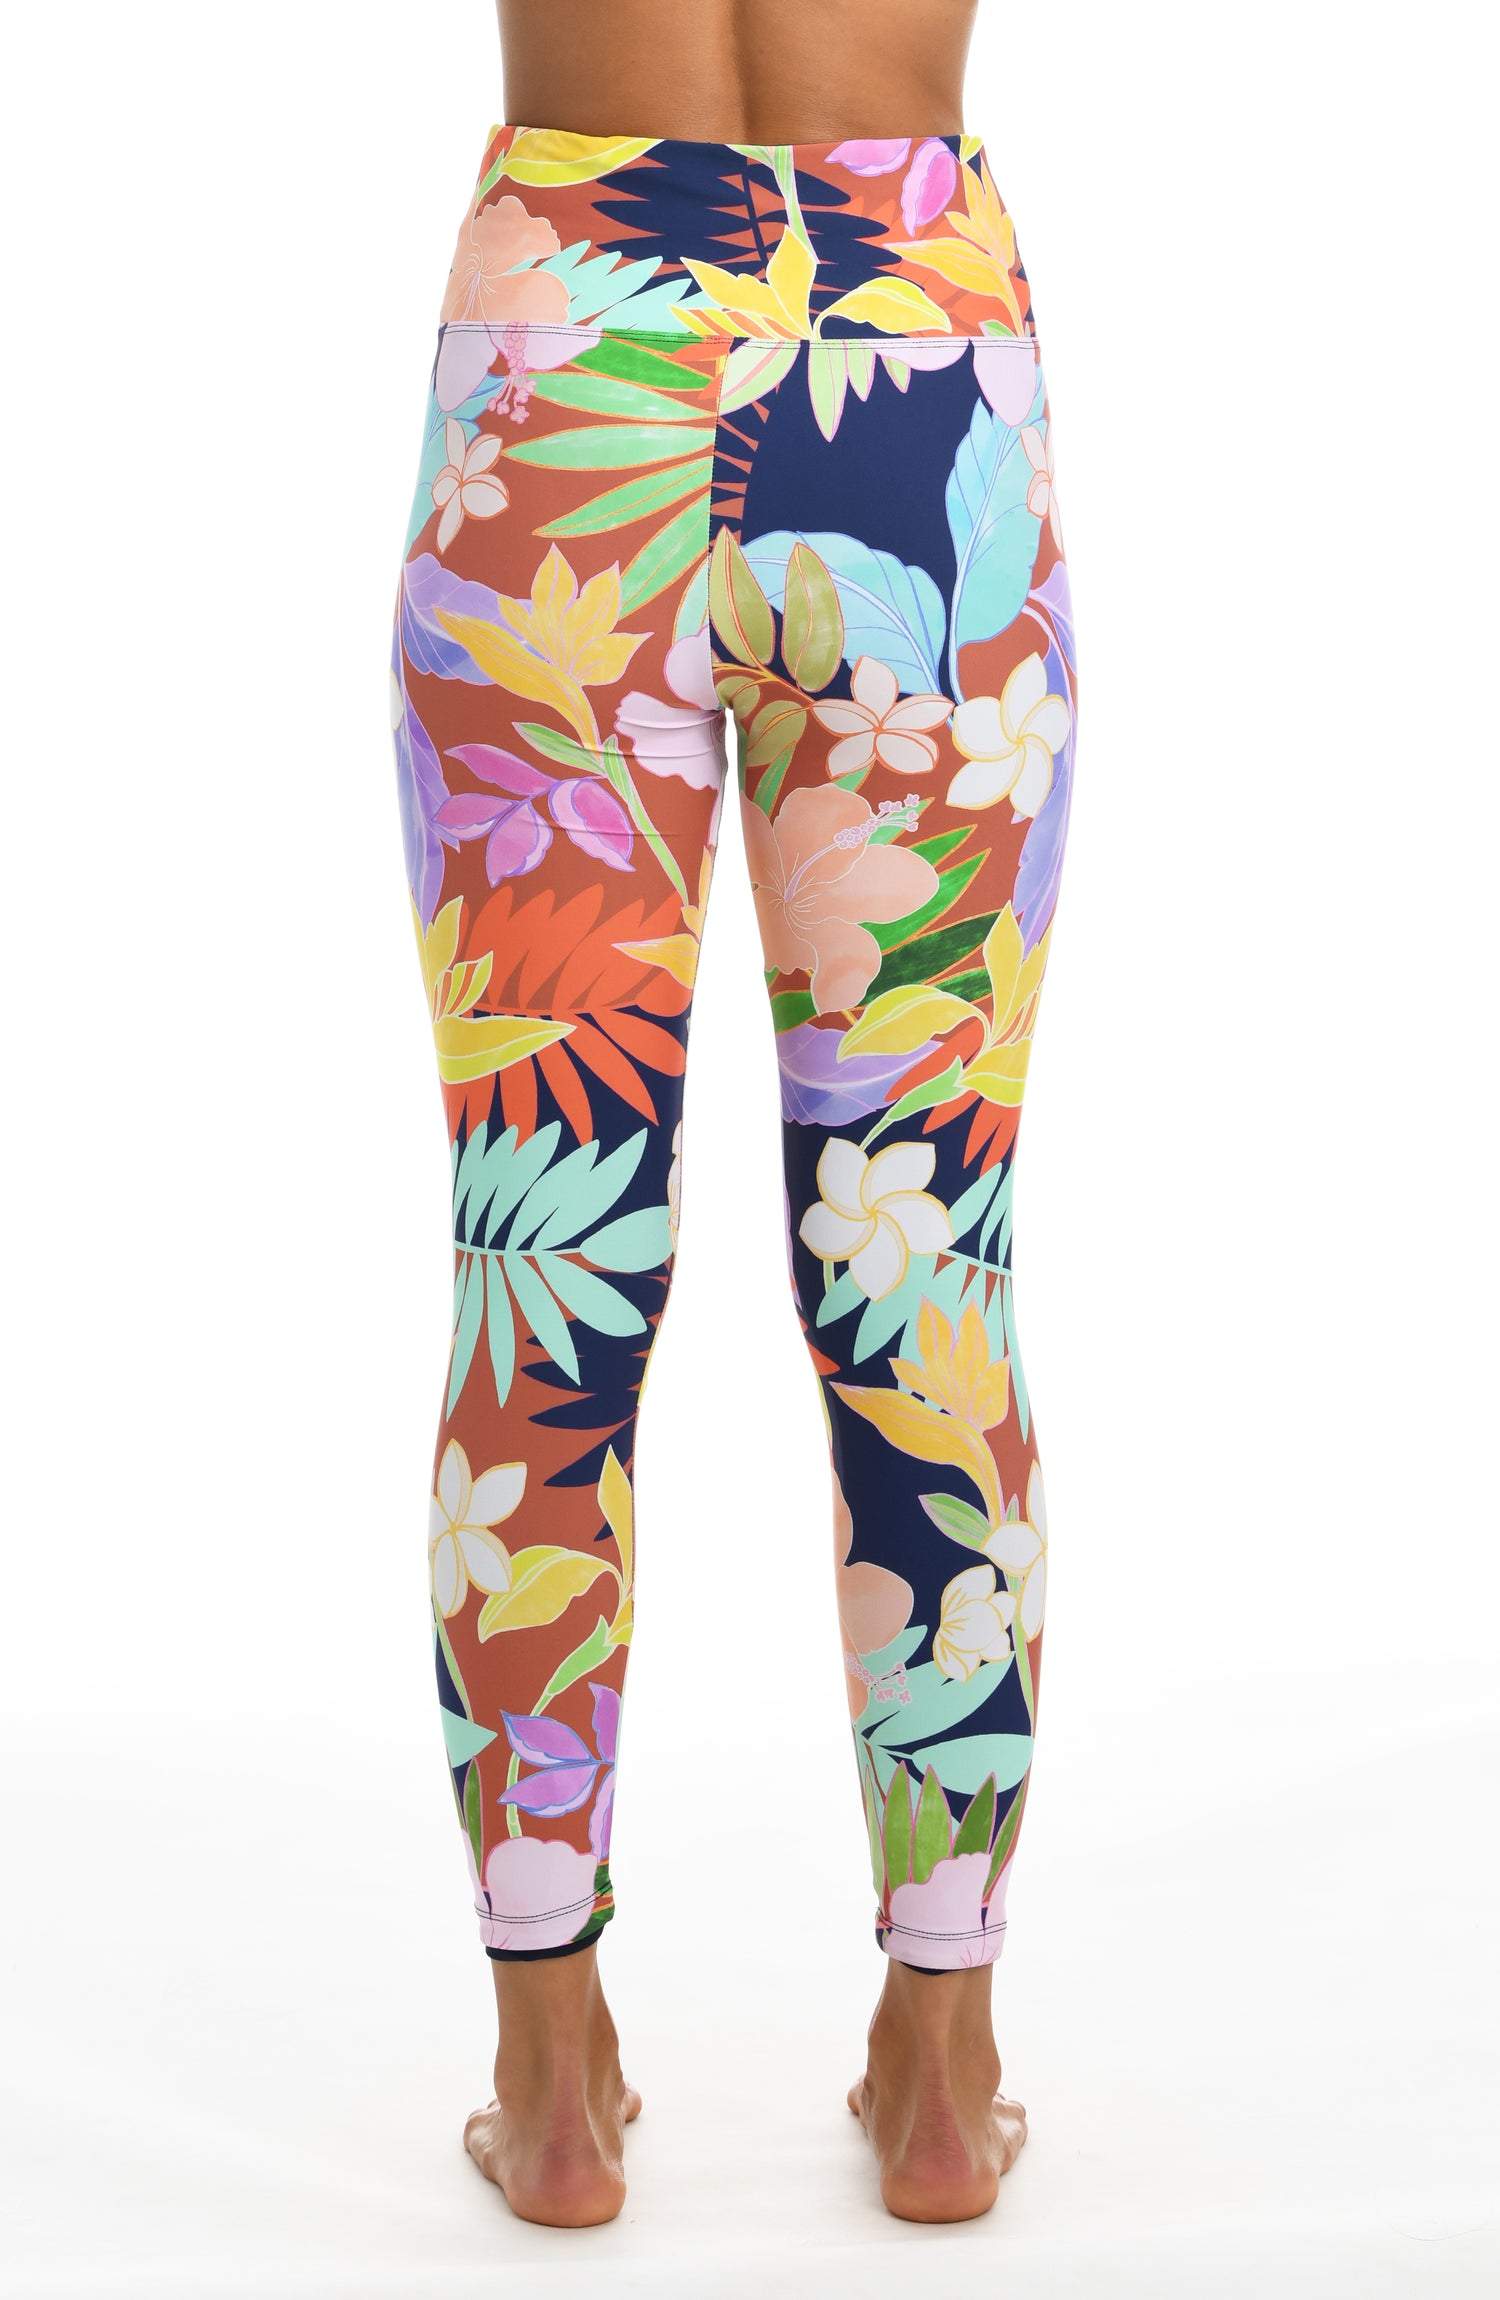 Model is wearing a multi-colored tropical high waist legging from our In The Tropics collection!